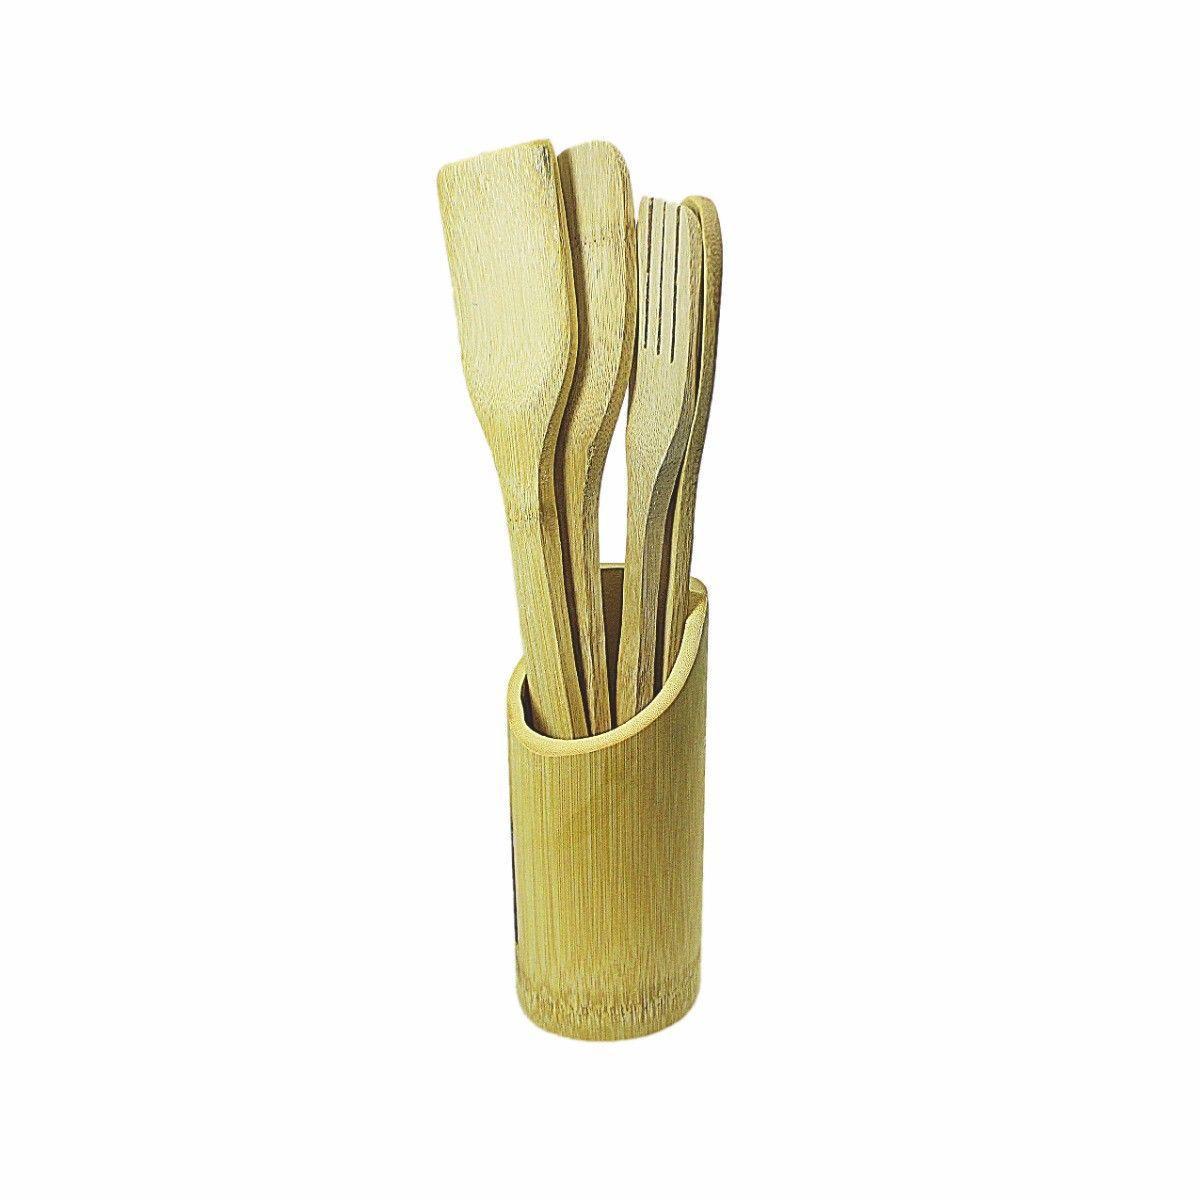 Bamboo Utensil Wooden Spoon Kitchen Set of 5 3827 / 4832 (Parcel Rate)